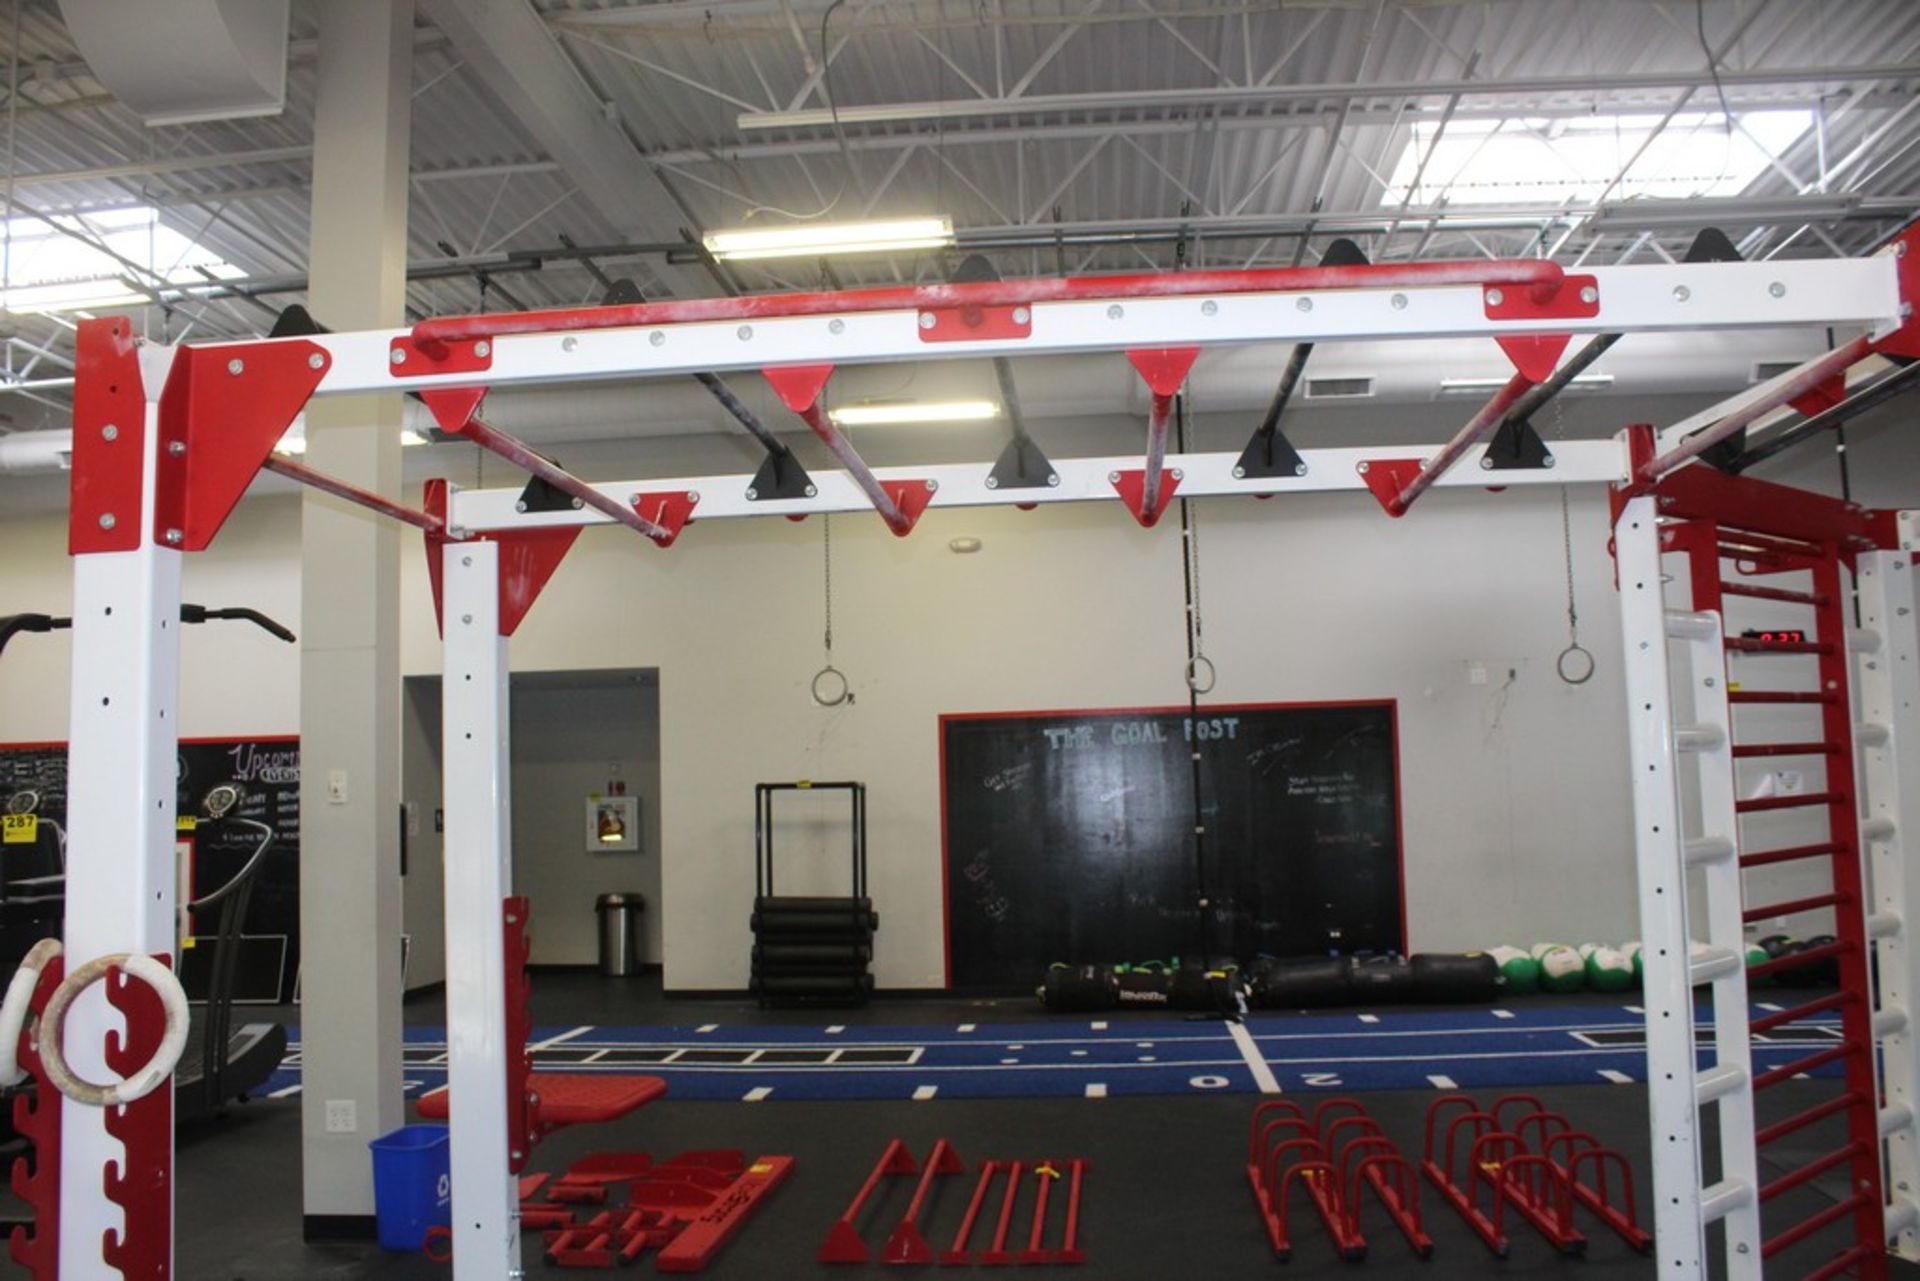 MOVESTRONG MODULAR MONKEY BAR SECTION, 10' X 5', WITH OUTER SUPPORT STRUCTURE - Image 4 of 5